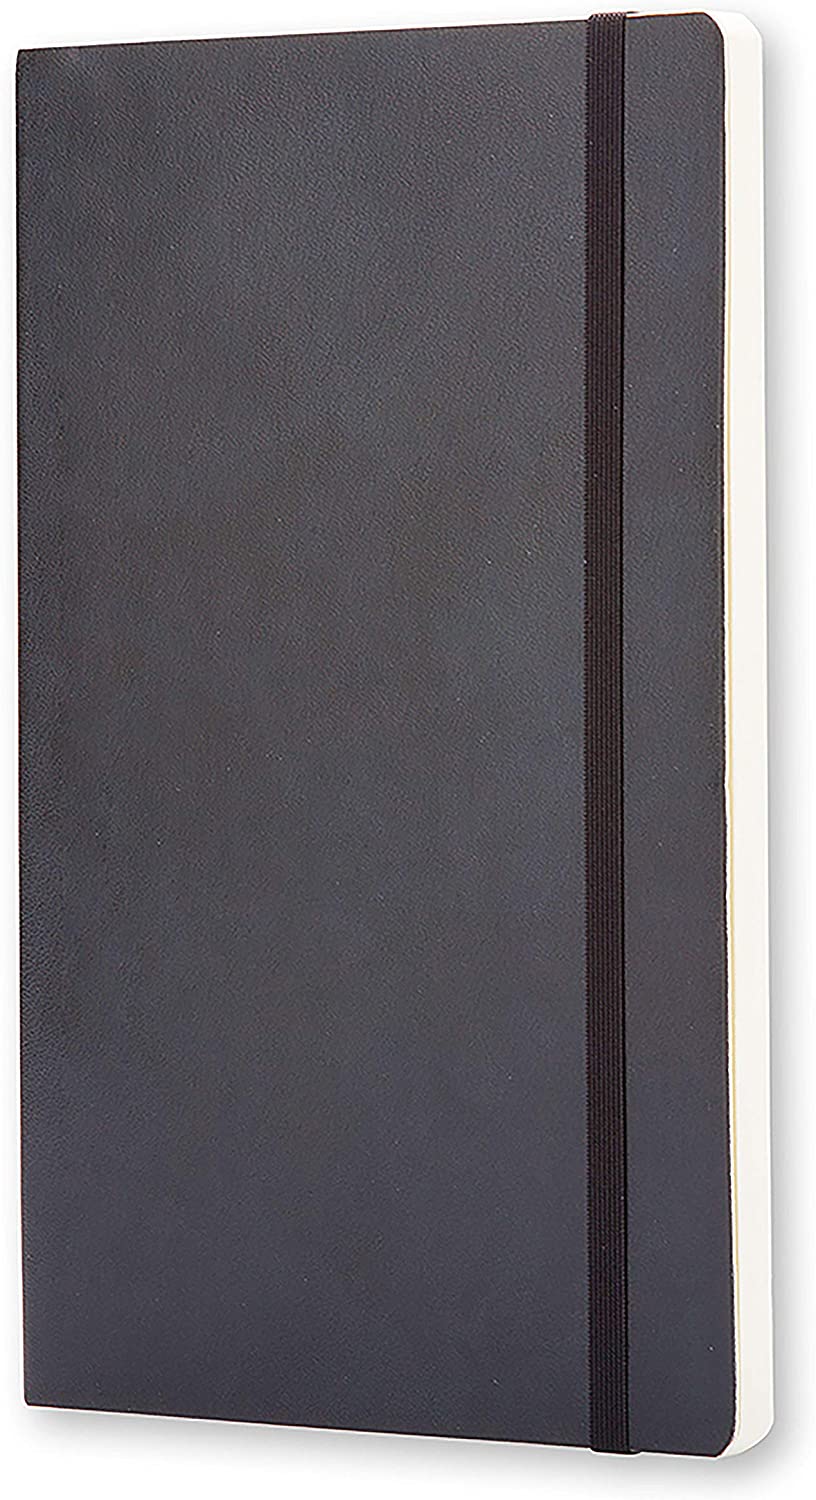 Moleskine - Classic Plain Paper Notebook - Soft Cover and Elastic Closure Journal - Color Black - Size Large 13 x 21 A5 - 192 Pages